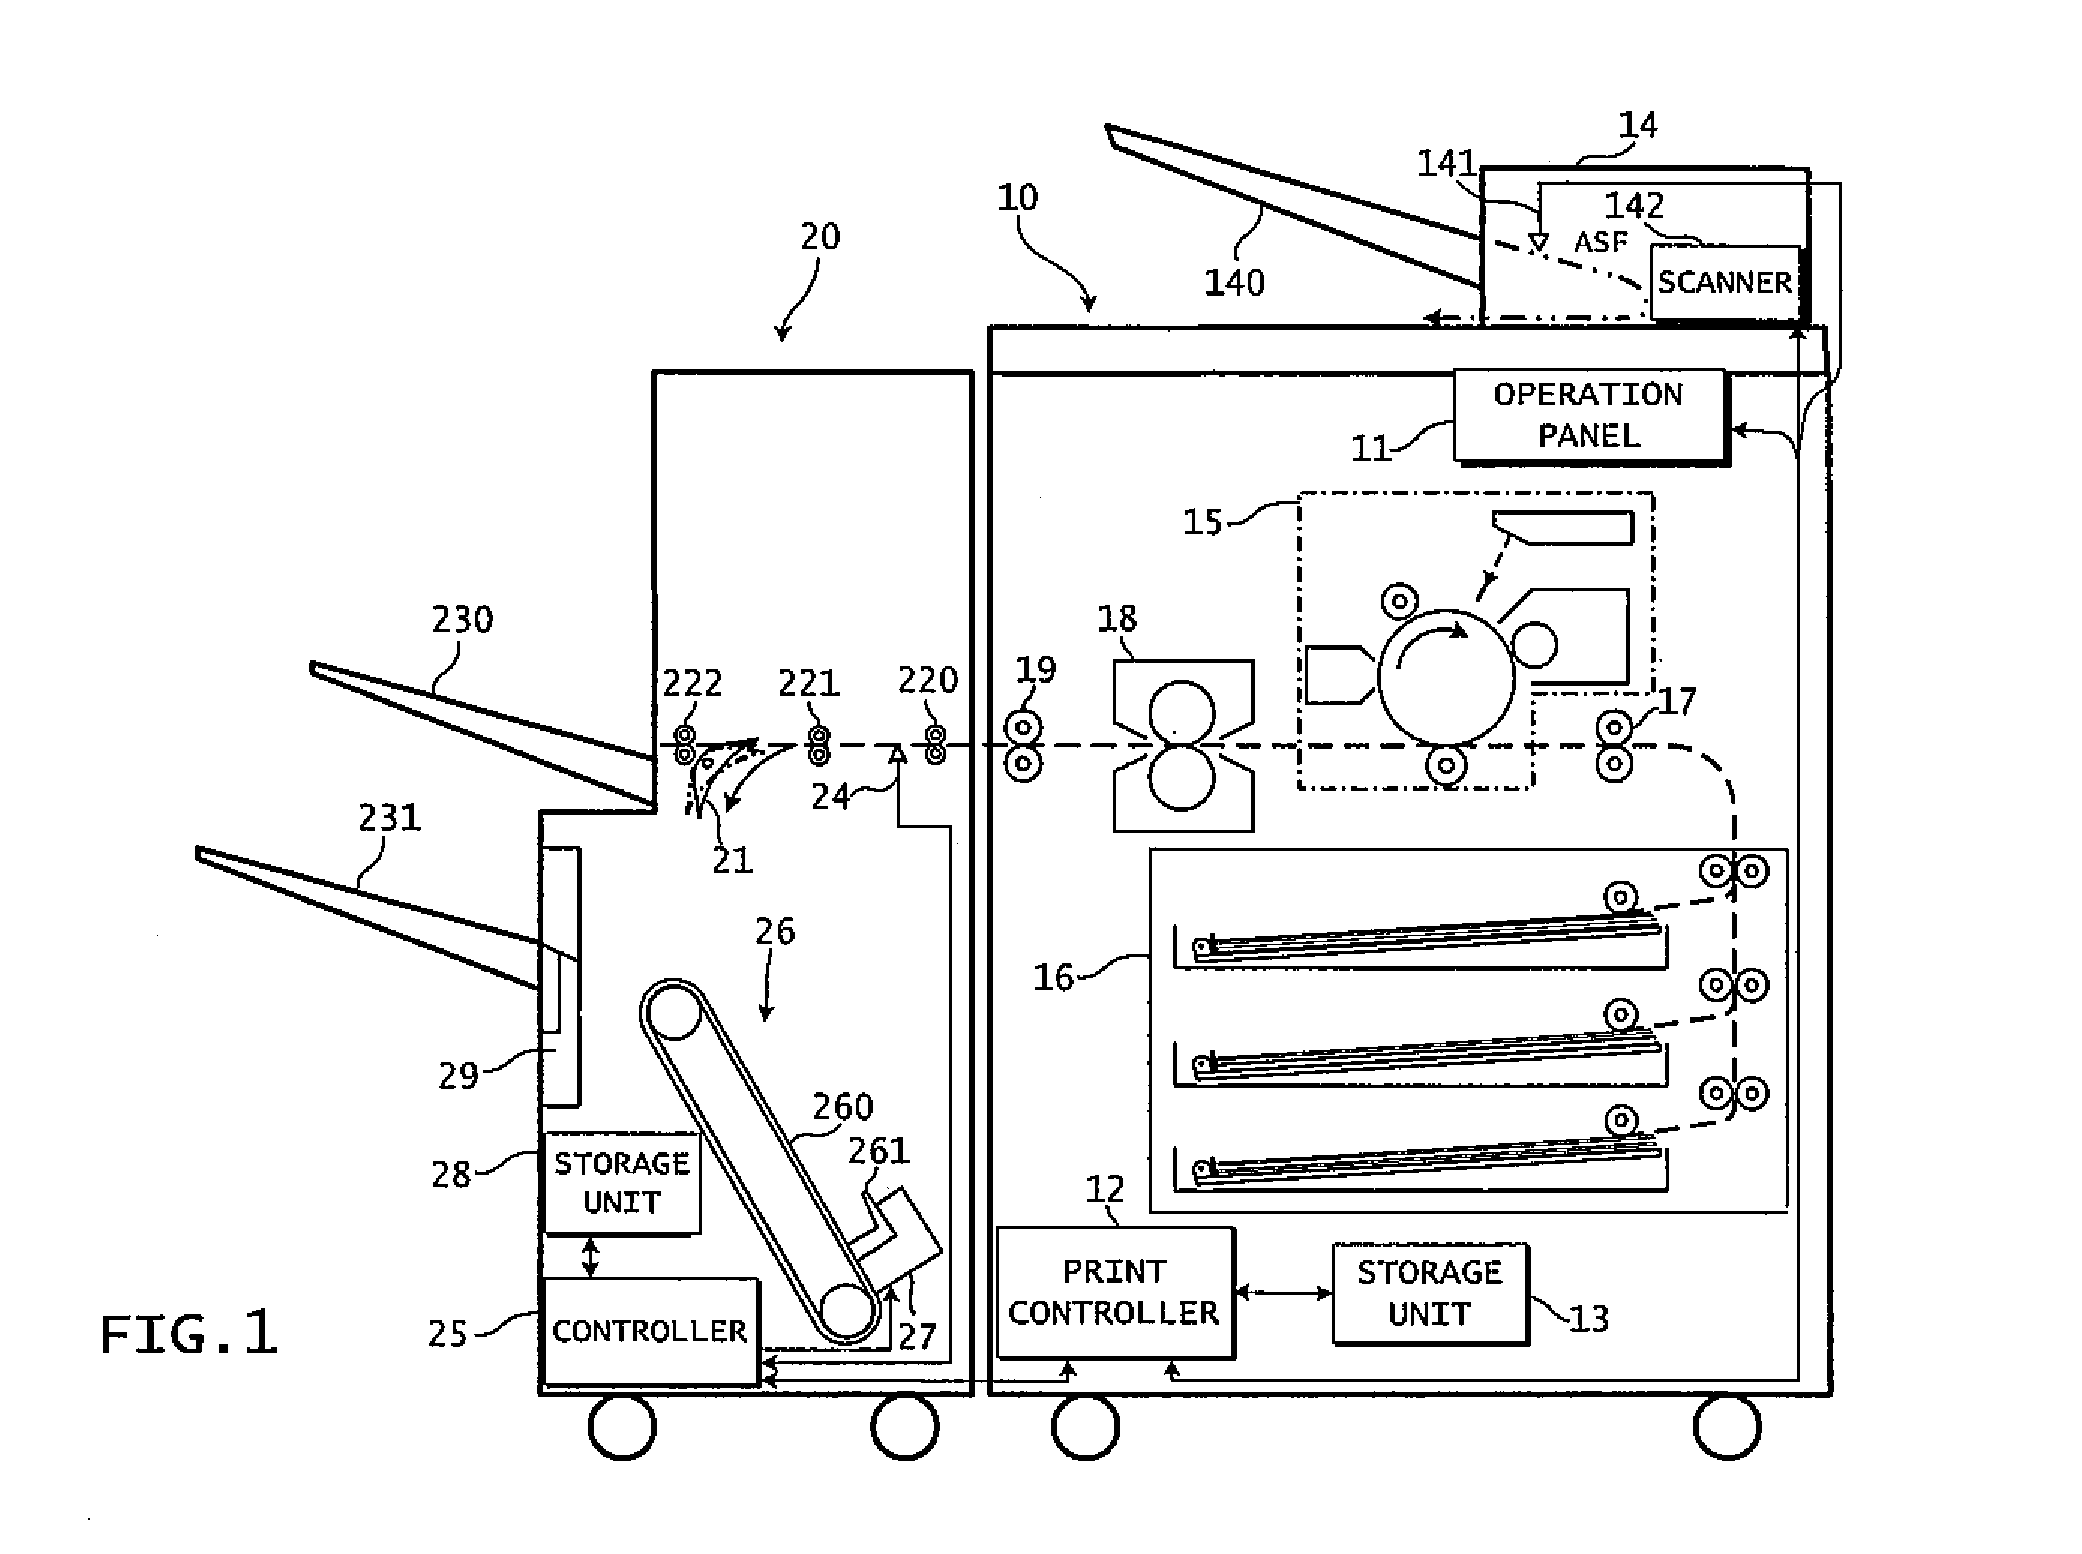 Image forming system including finisher with stapler for binding printed papers